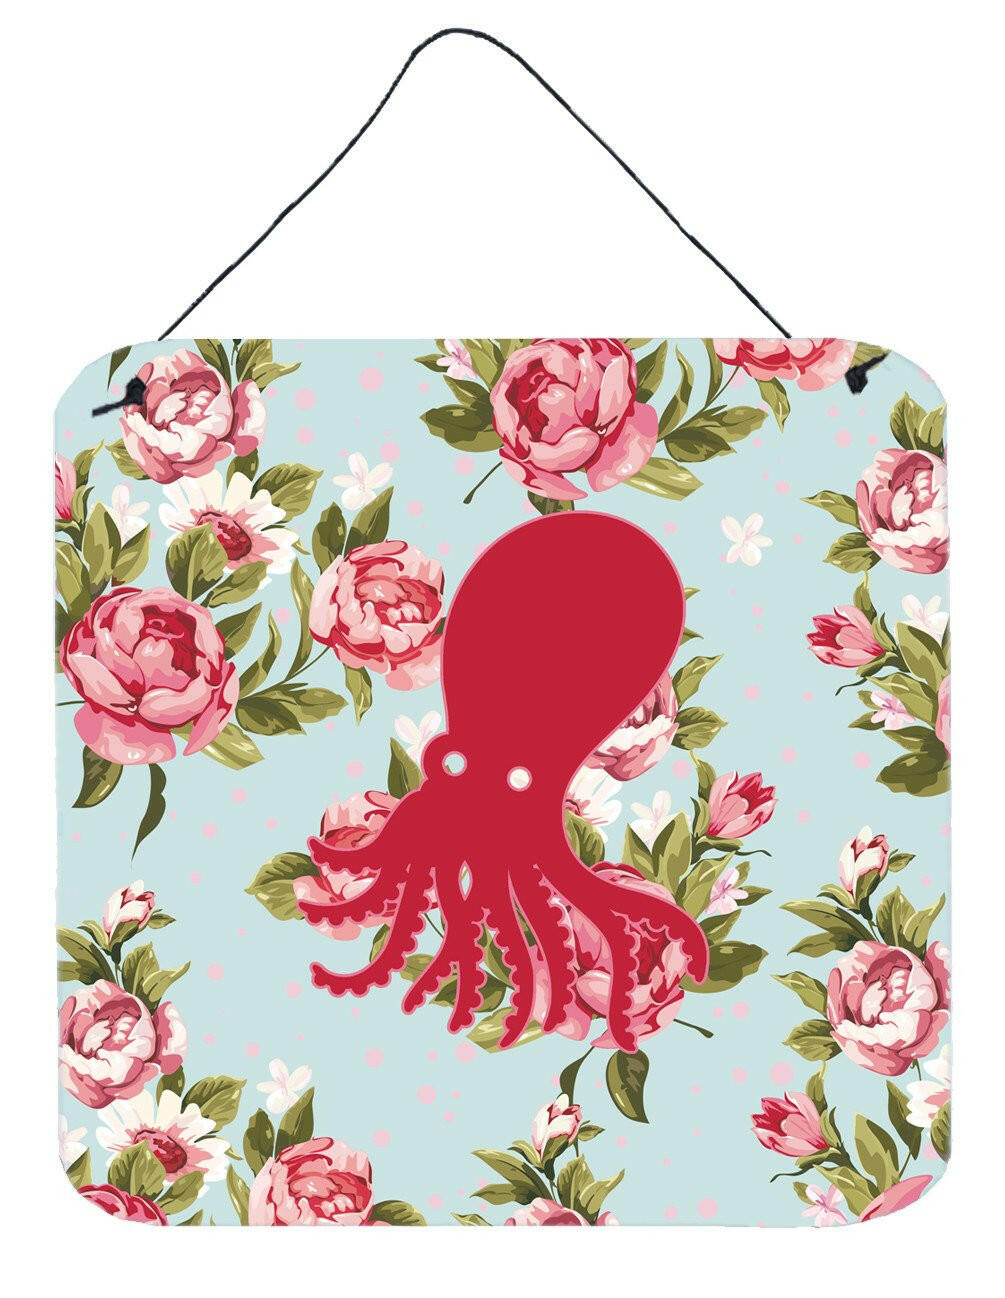 Octopus Shabby Chic Blue Roses Wall or Door Hanging Prints BB1098 by Caroline's Treasures